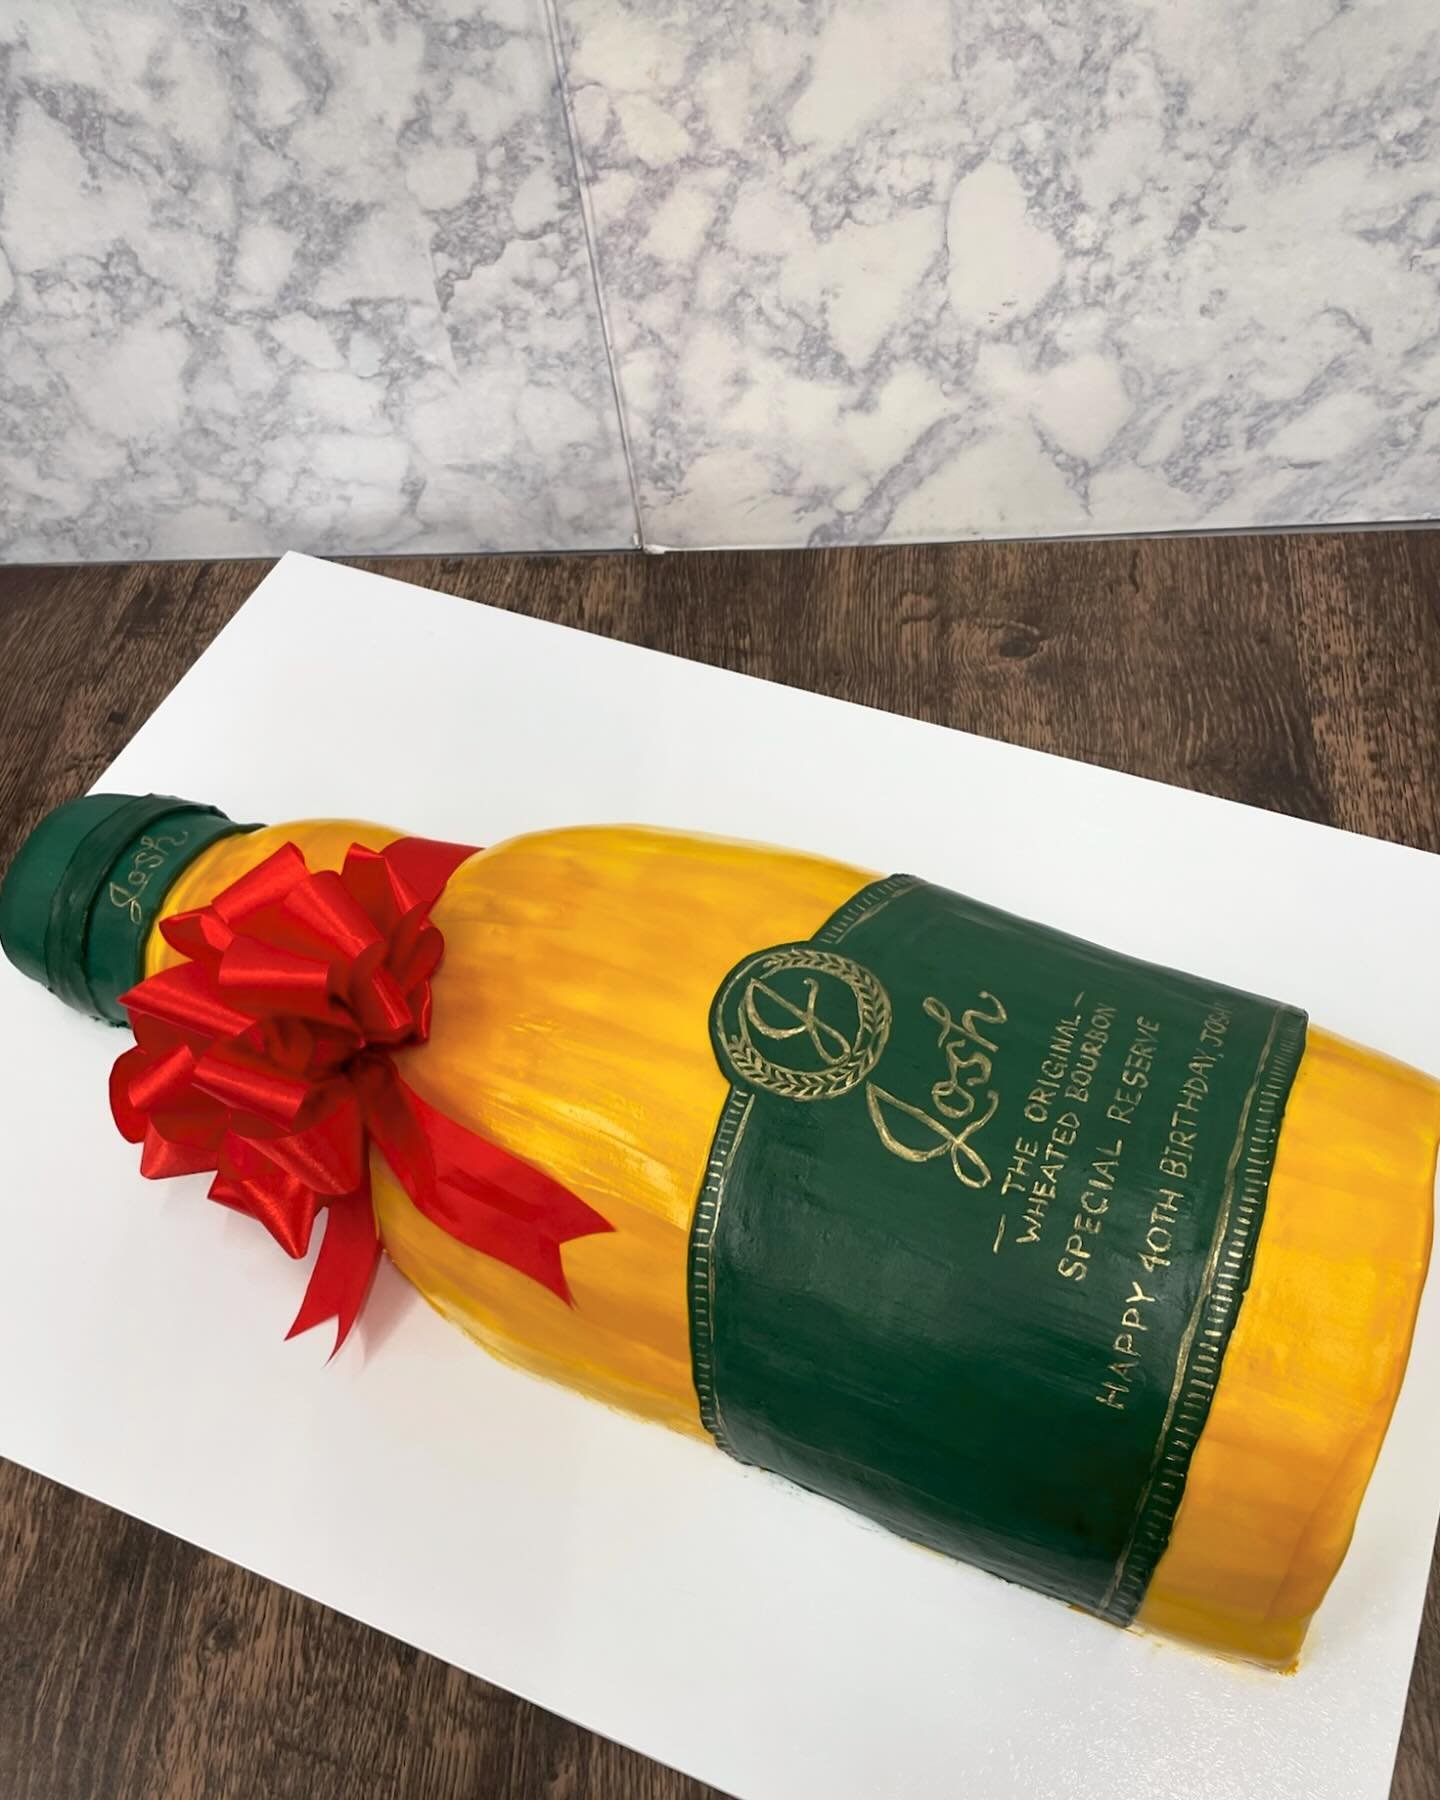 Kick up your celebration a couple notches by getting a custom cake for any occasion🥃✨🍰

Whether it&rsquo;s your favorite liquor, a dream vacation spot, or a replica of your pet&mdash;we can make you cake dreams come to life🤩

.

.

.

.

#cake #ca